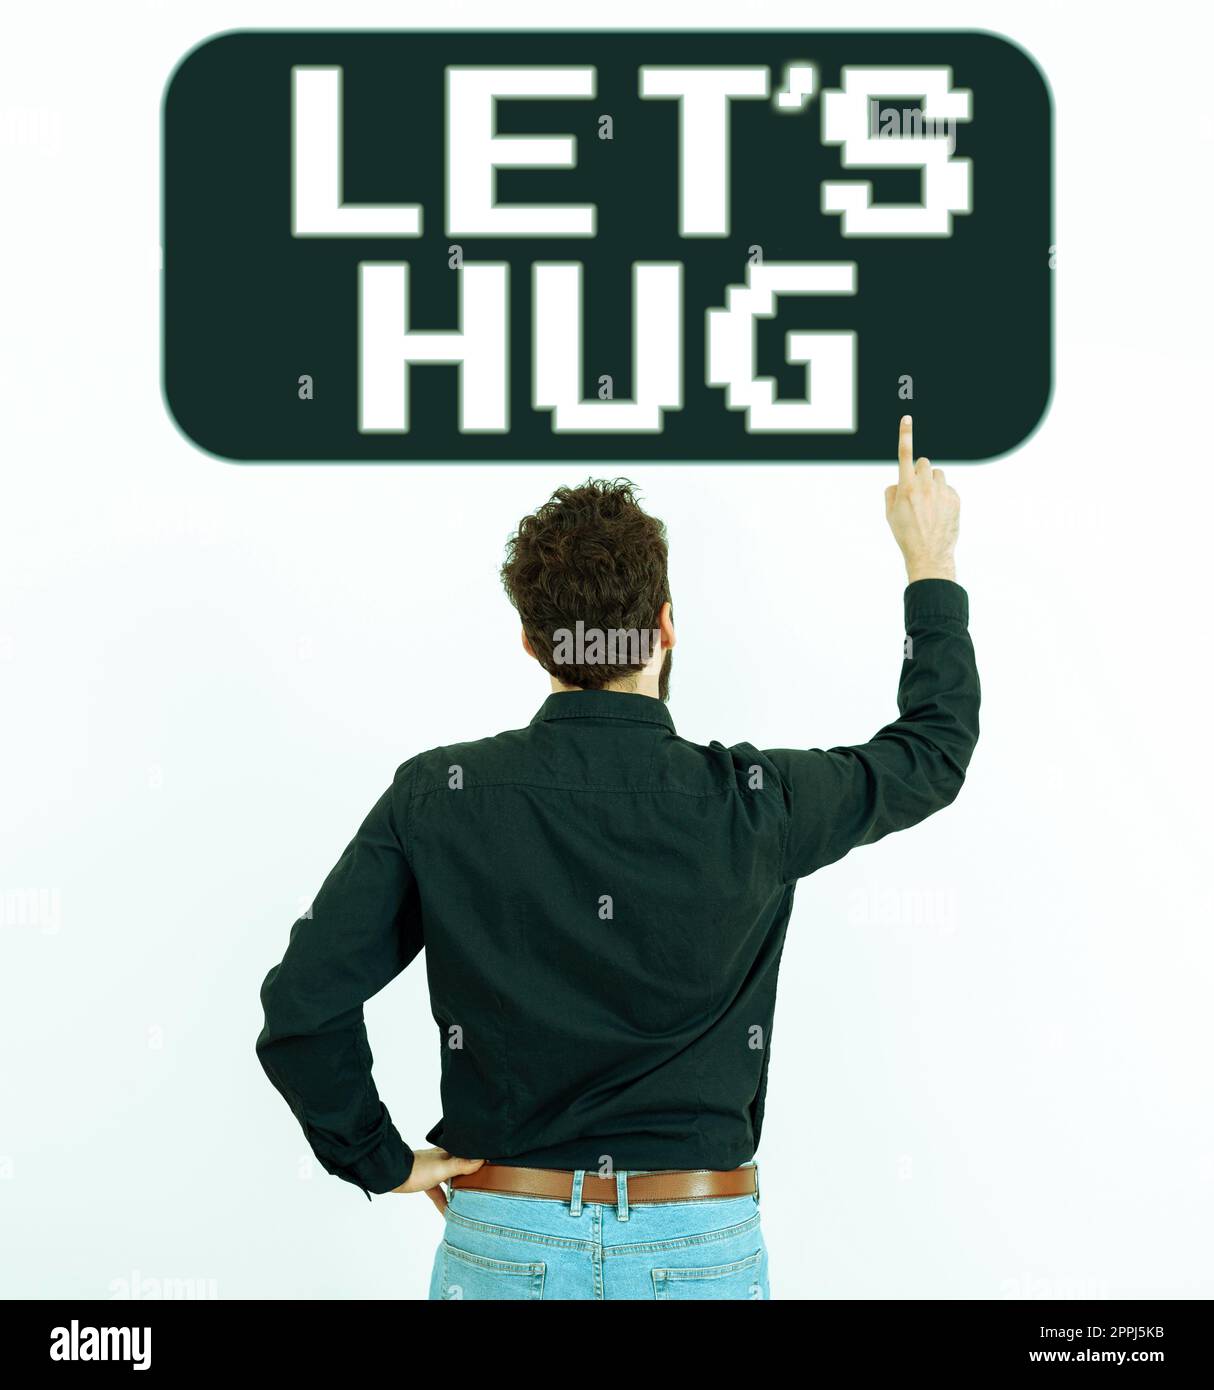 Inspiration showing sign Let's Hug. Business concept asking to hold close for warmth or comfort or in affection Stock Photo